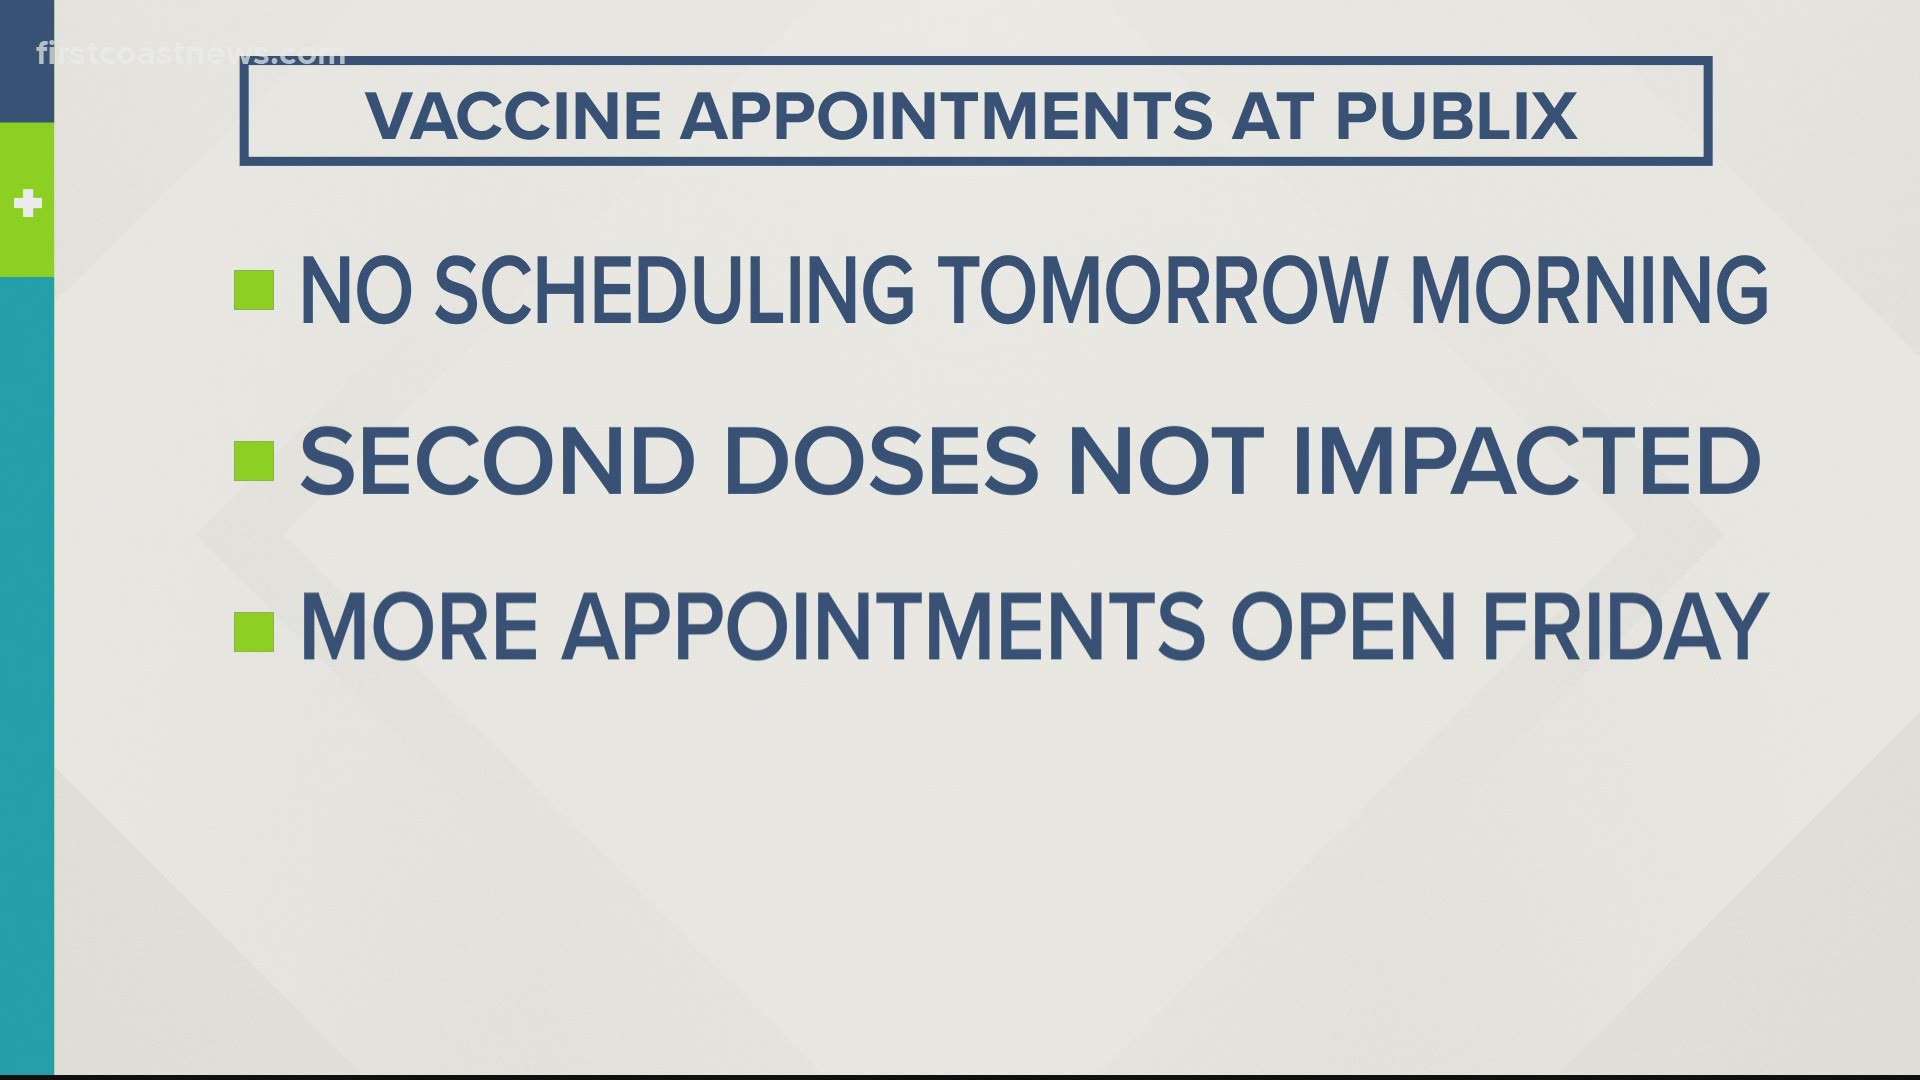 People needed to get their second dose of the COVID-19 vaccine will not be affected.